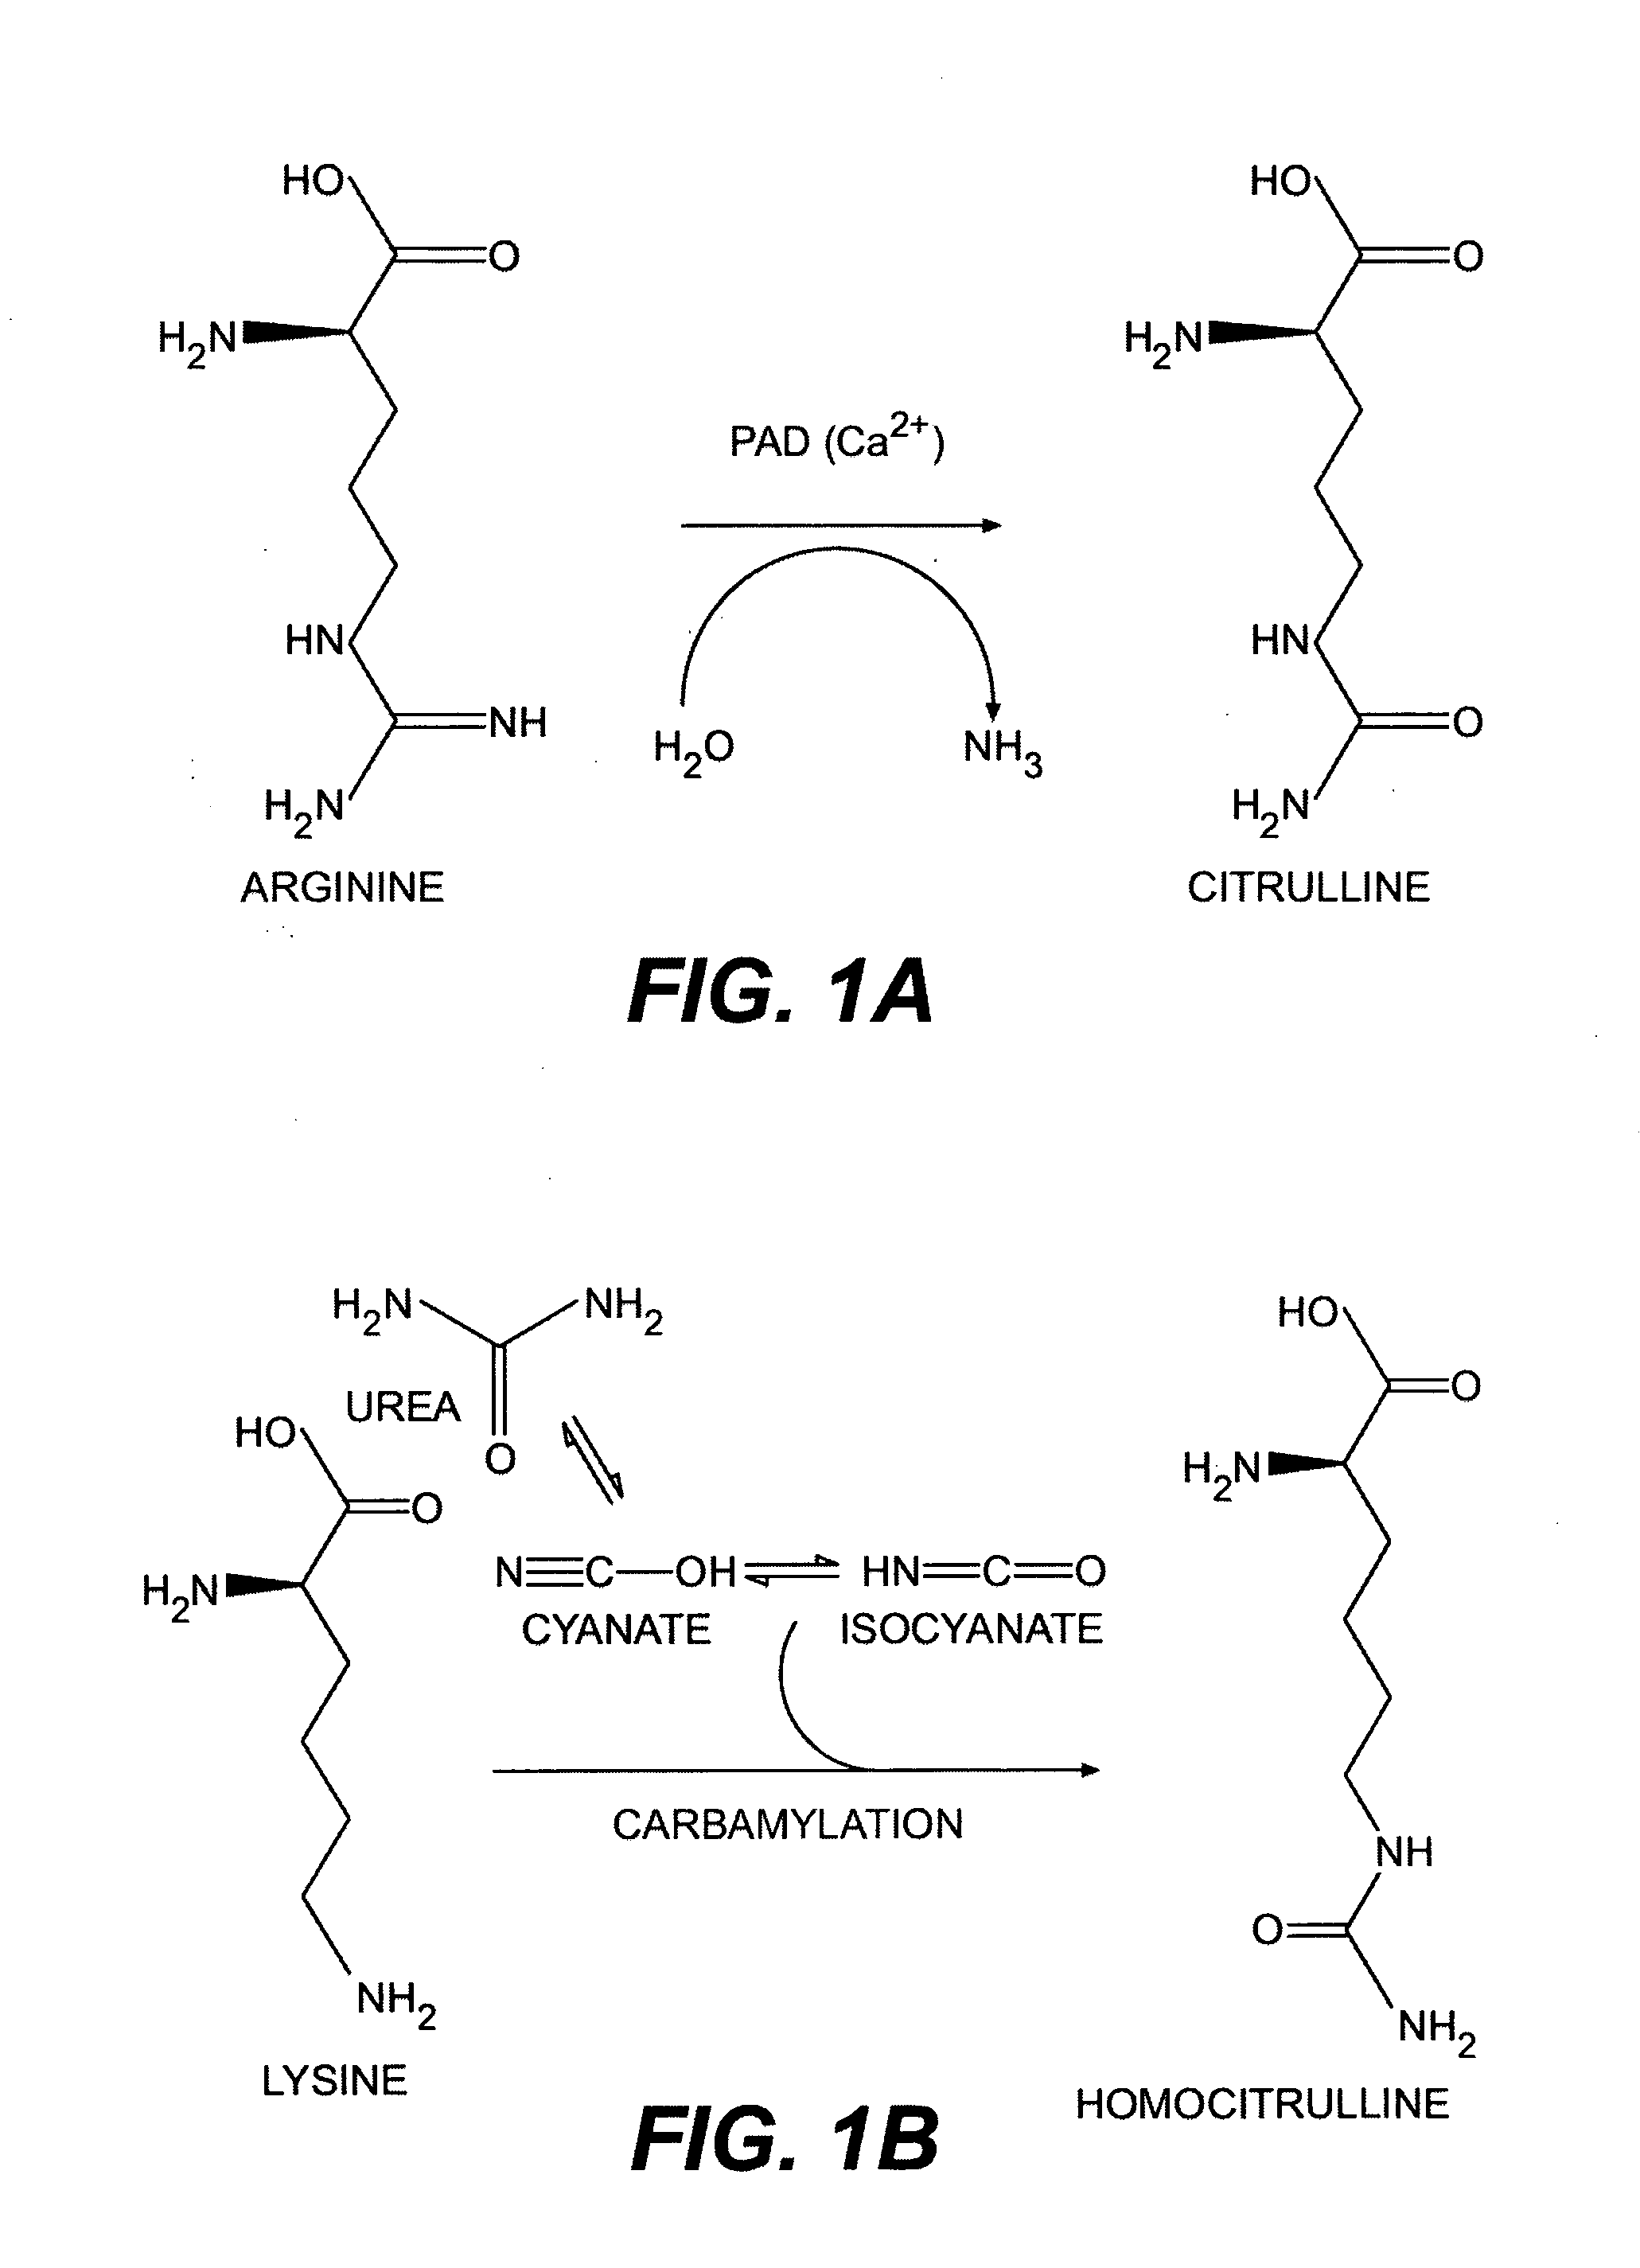 Methods for modifying, isolating, detecting, visualizing, and quantifying citrullinated and/or homocitrullinated peptides, polypeptides and proteins